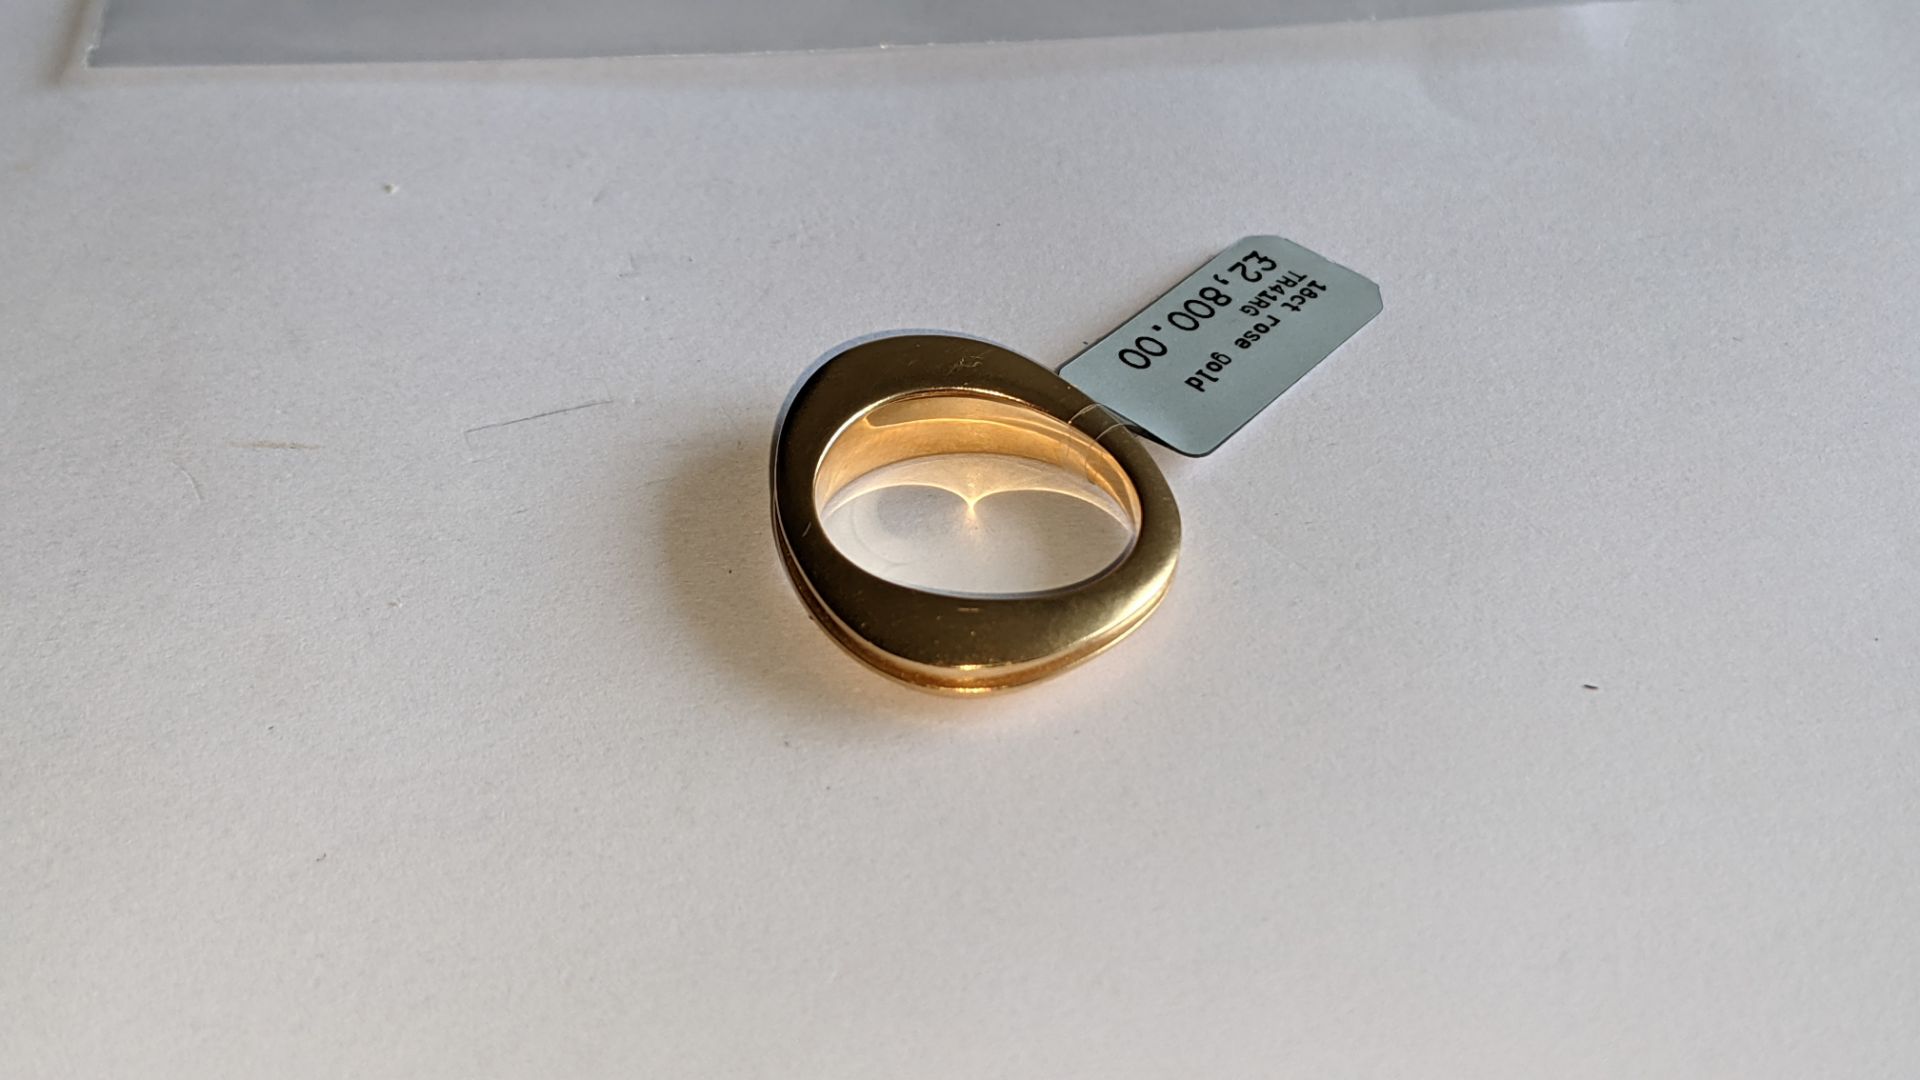 18ct rose gold ring with central stone assumed to be a diamond. RRP £2,800 - Image 10 of 18